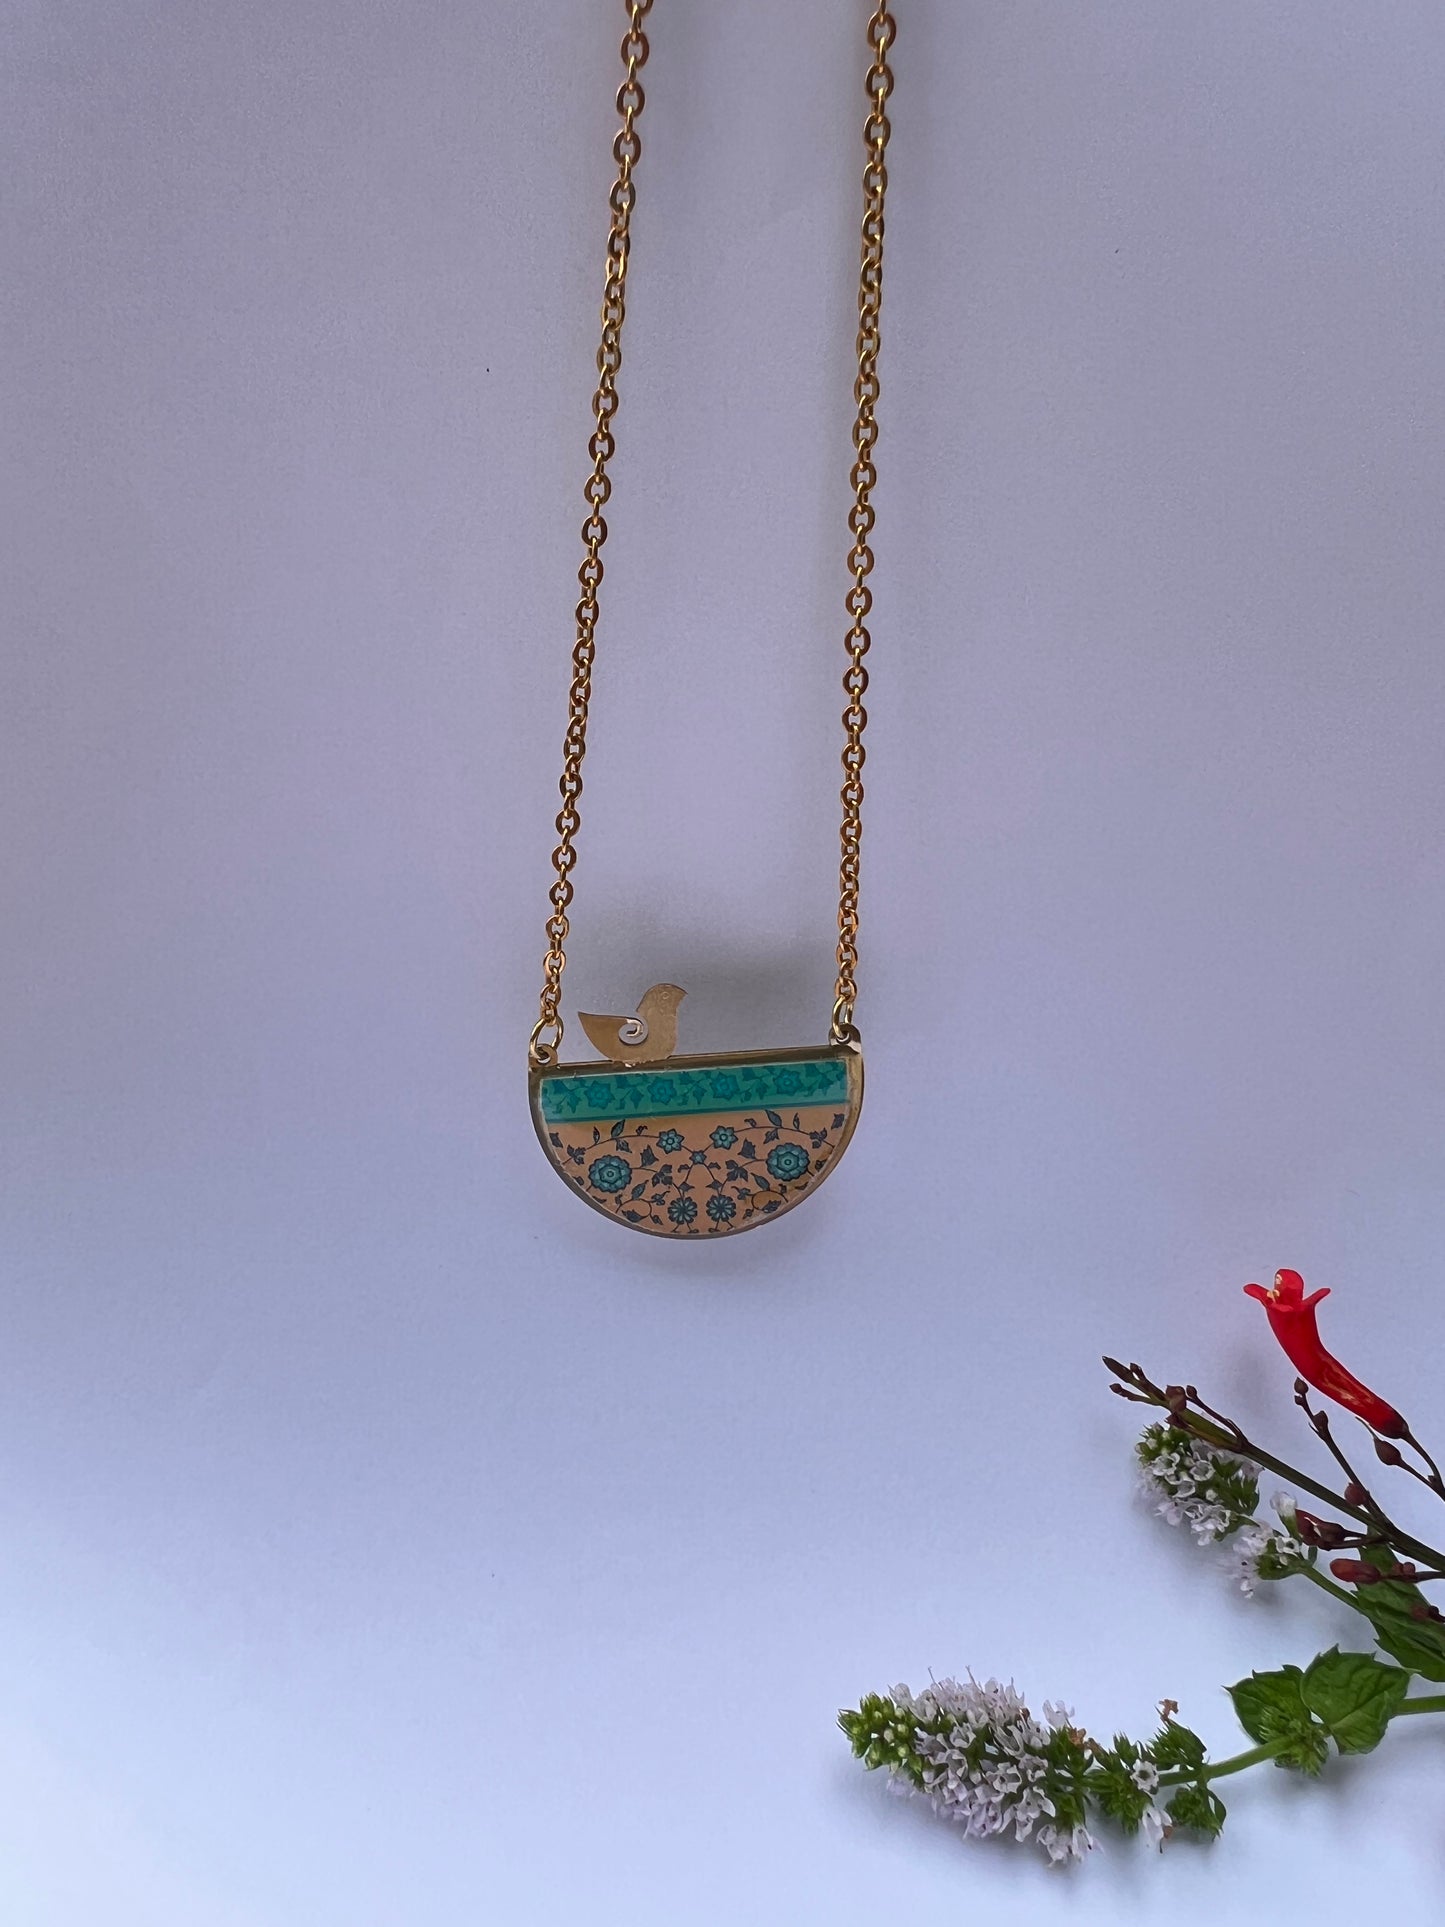 Turquoise and golden orange half circle necklace with bird